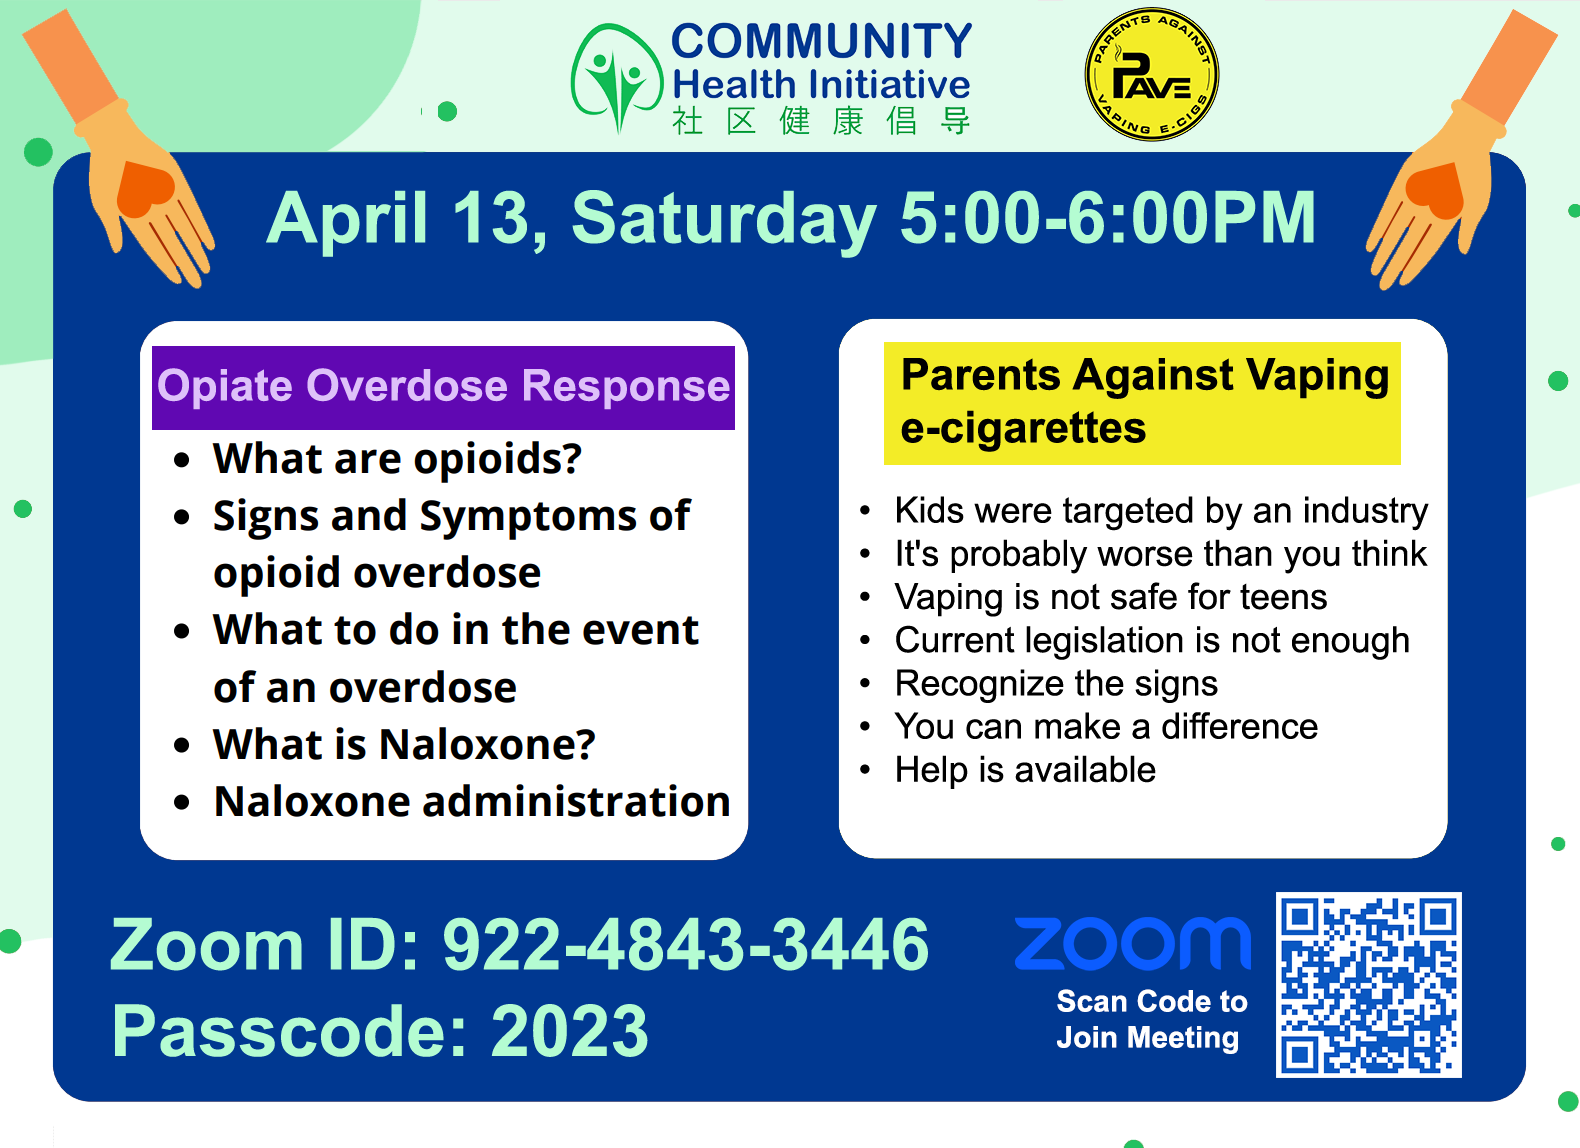 A Special Presentations On Opiate Overdose Response, And Parents Against Vaping And E-cigarette Training